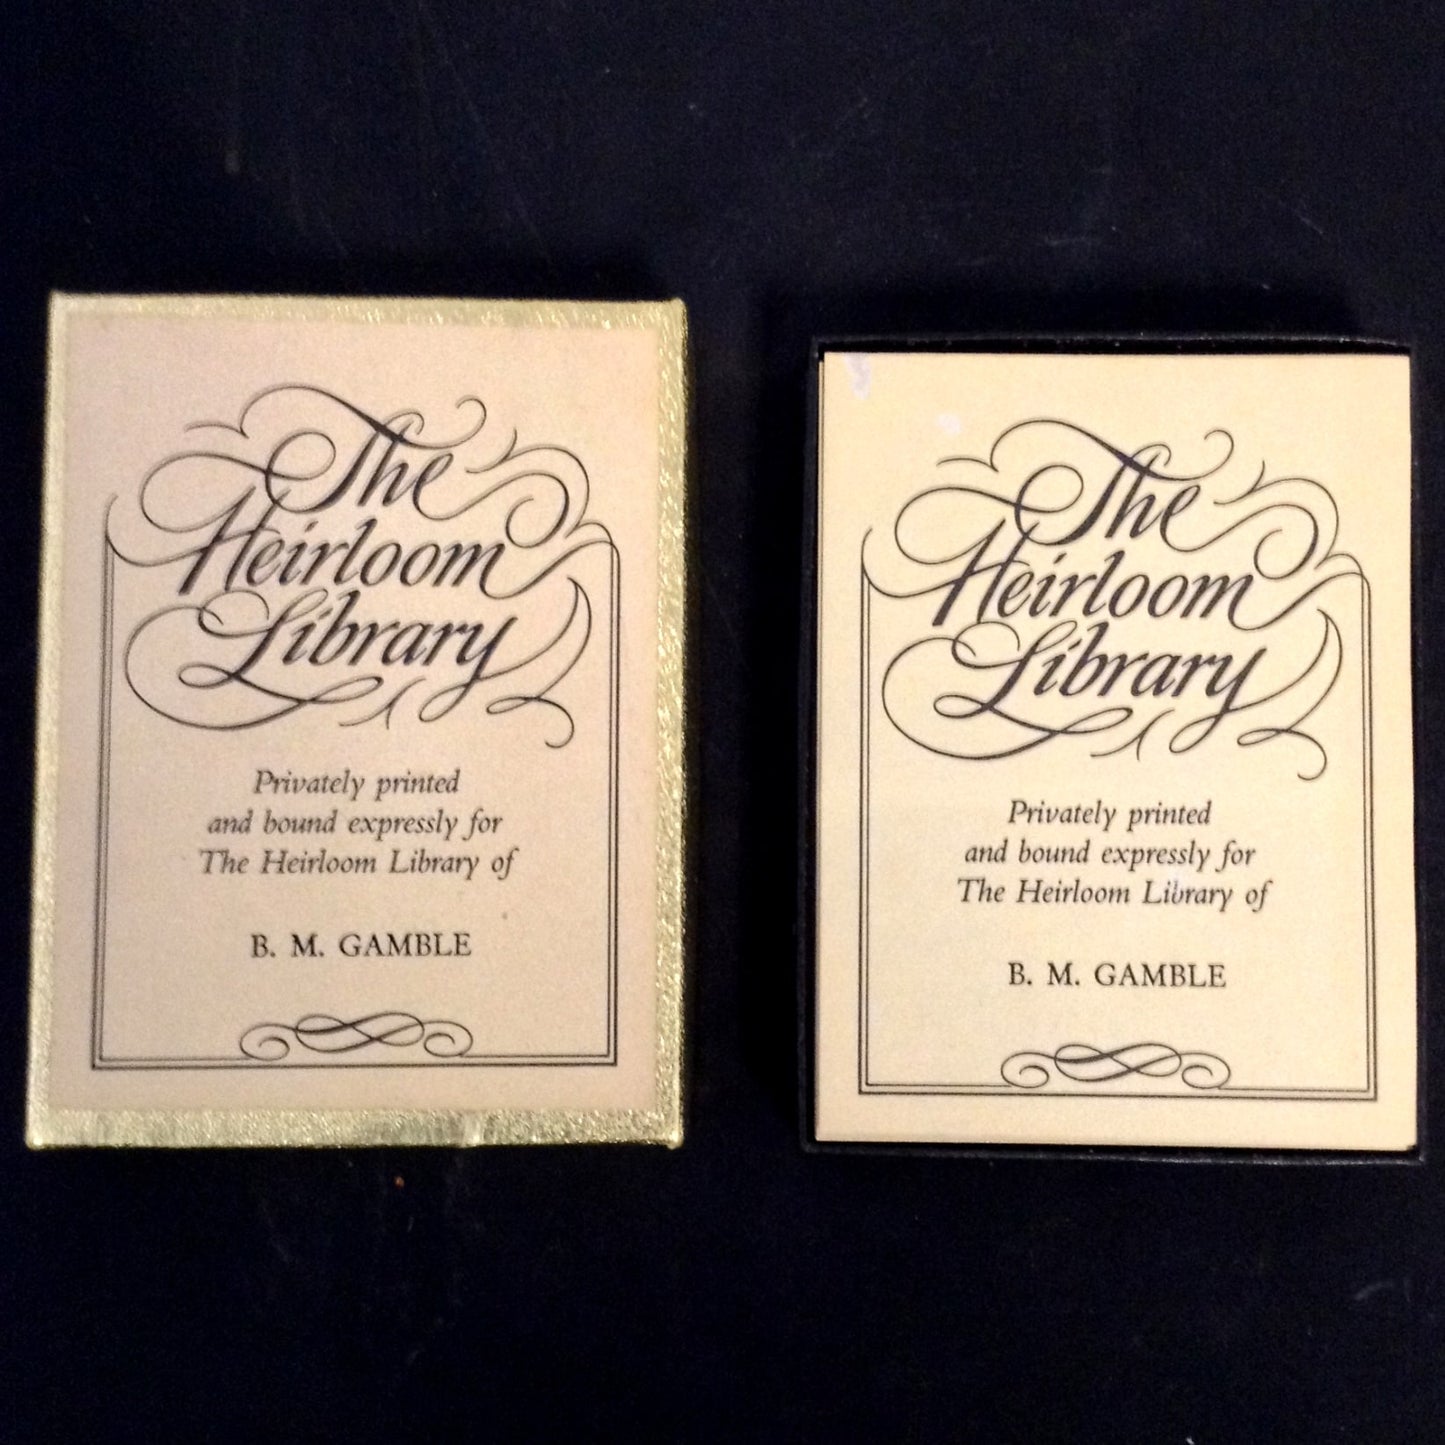 The Heirloom Library Labels